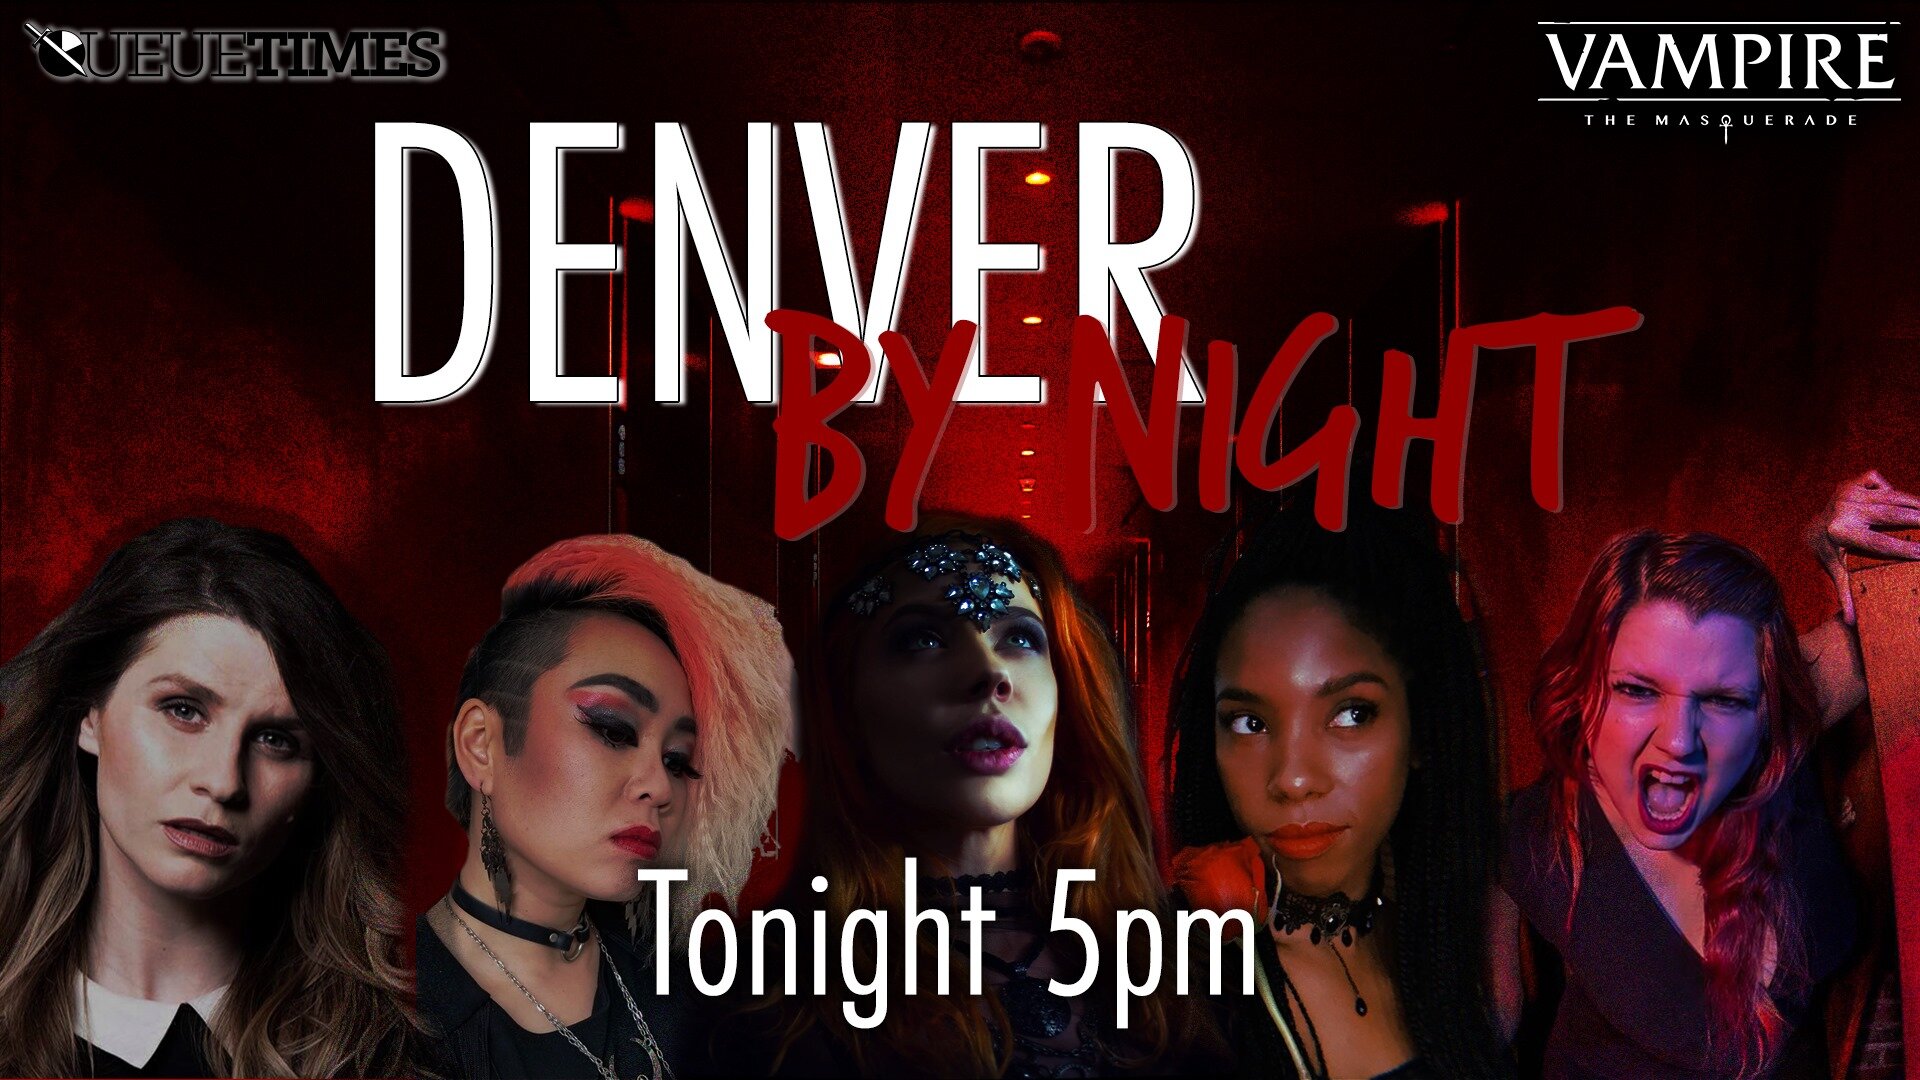  “Denver By Night'“ live RPG show on Queutimes Network 